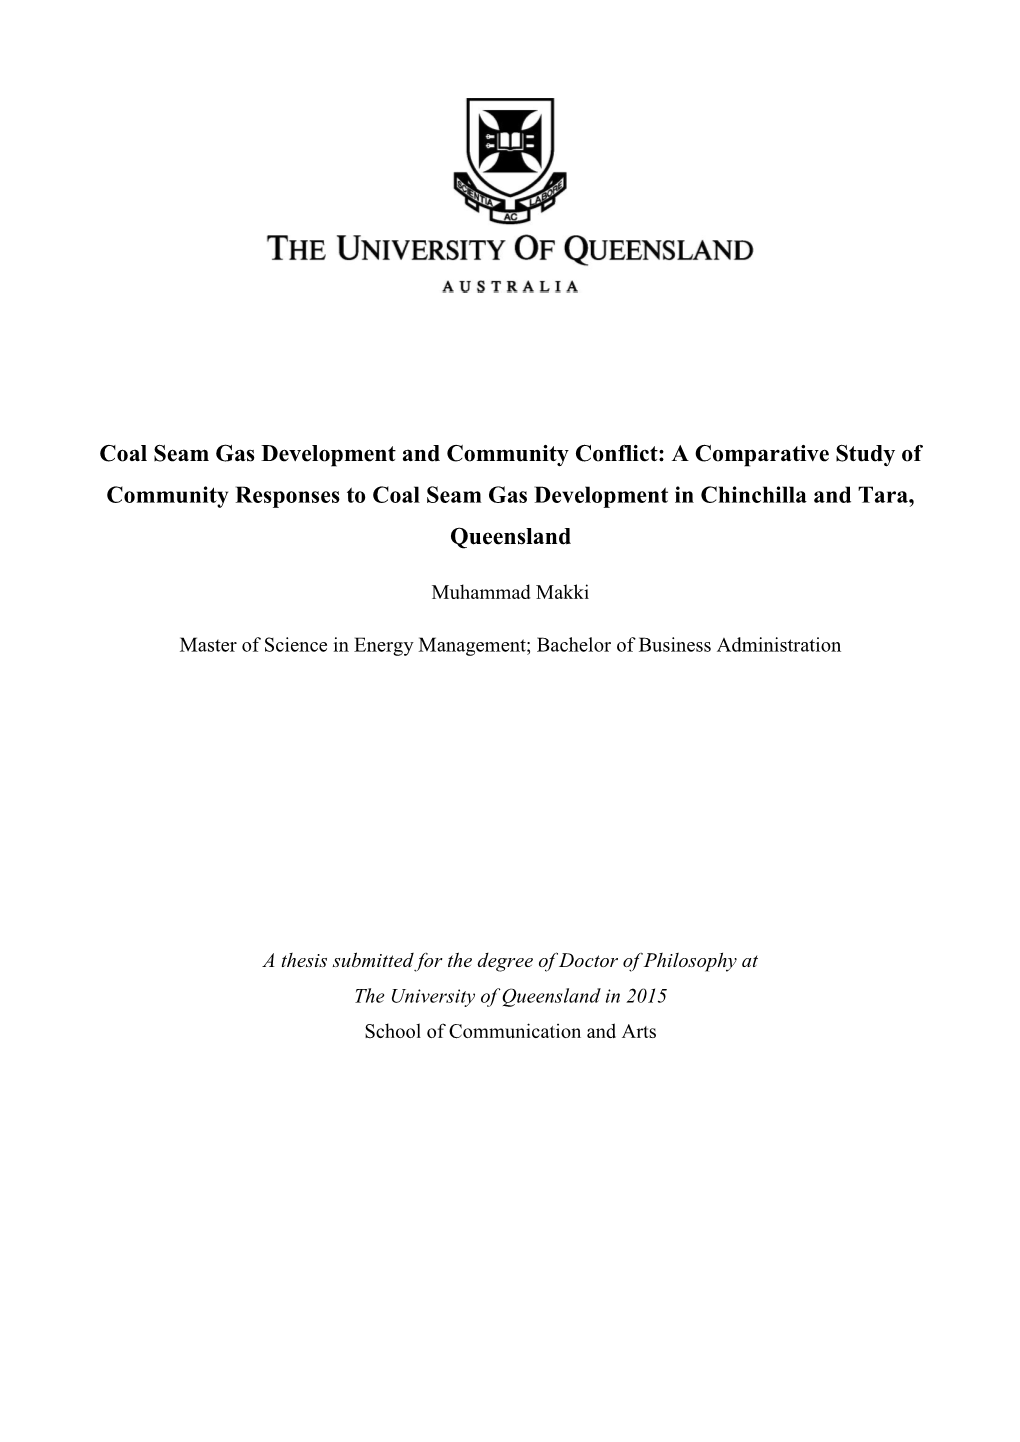 Coal Seam Gas Development and Community Conflict: a Comparative Study of Community Responses to Coal Seam Gas Development in Chinchilla and Tara, Queensland